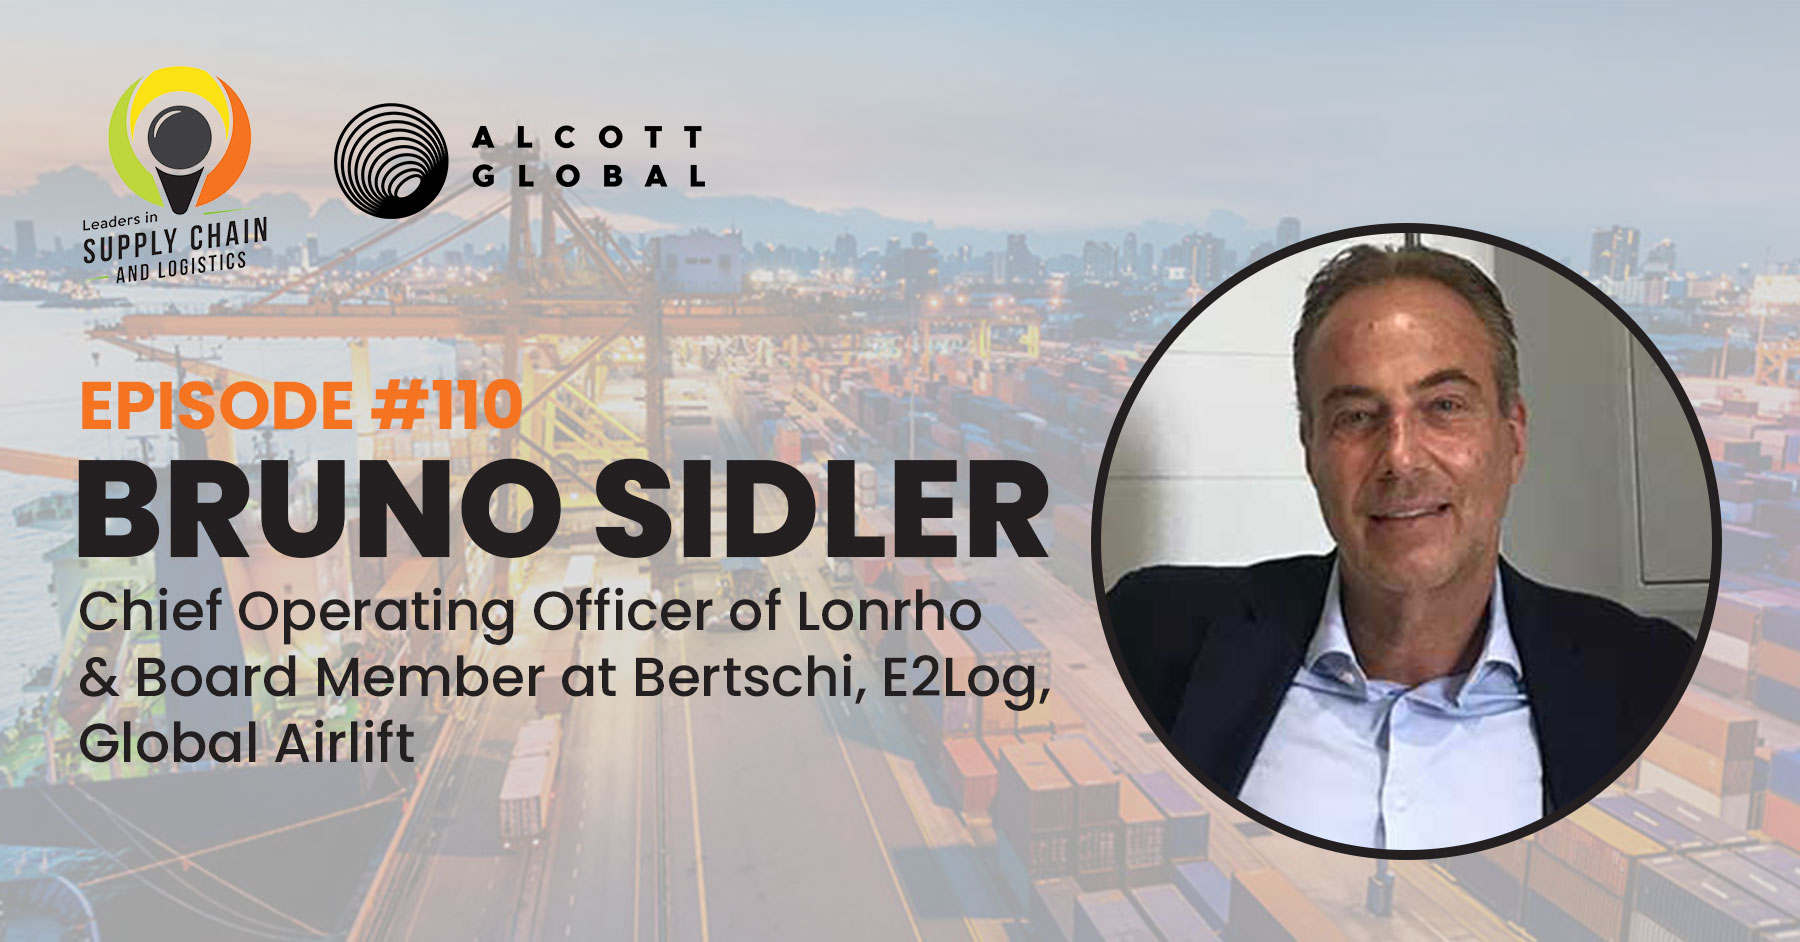 #110: Bruno Sidler Chief Operating Officer of Lonrho & Board Member at Bertschi, E2Log, Global Airlift Featured Image